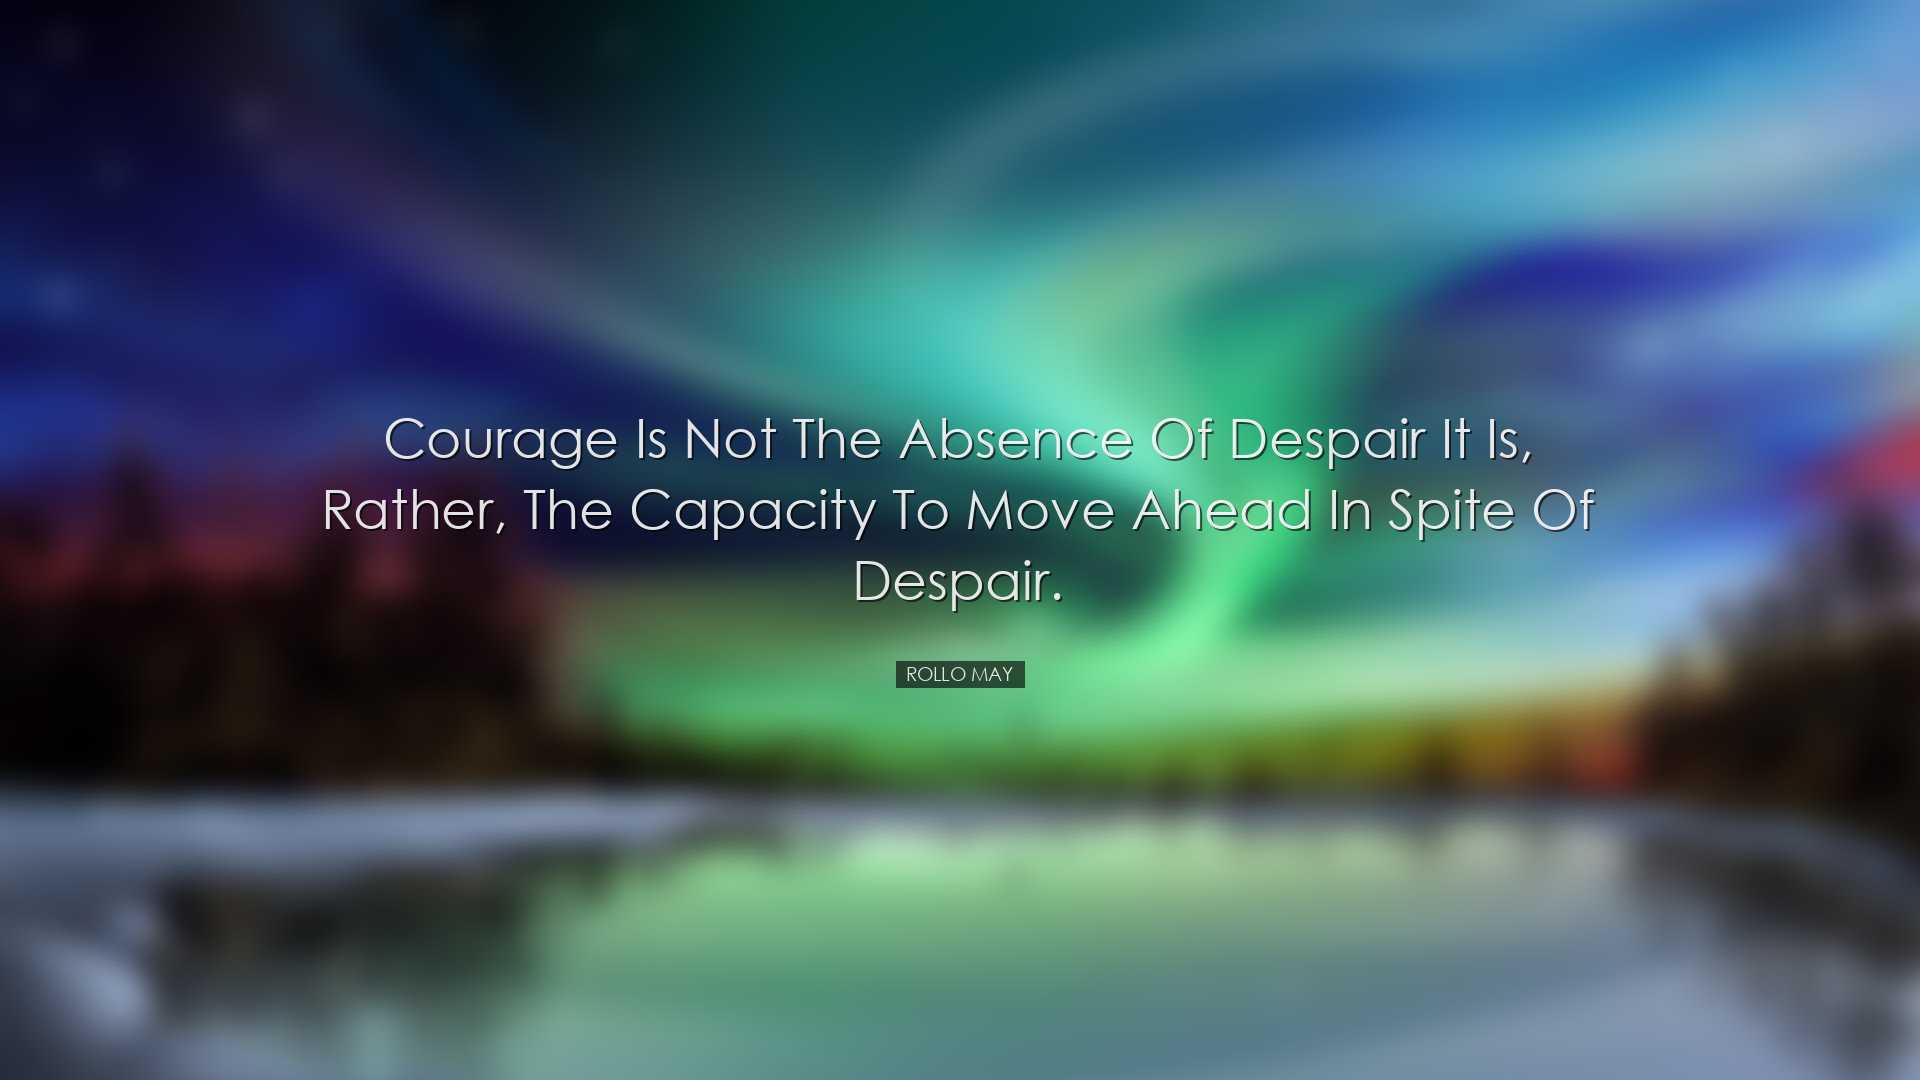 Courage is not the absence of despair it is, rather, the capacity